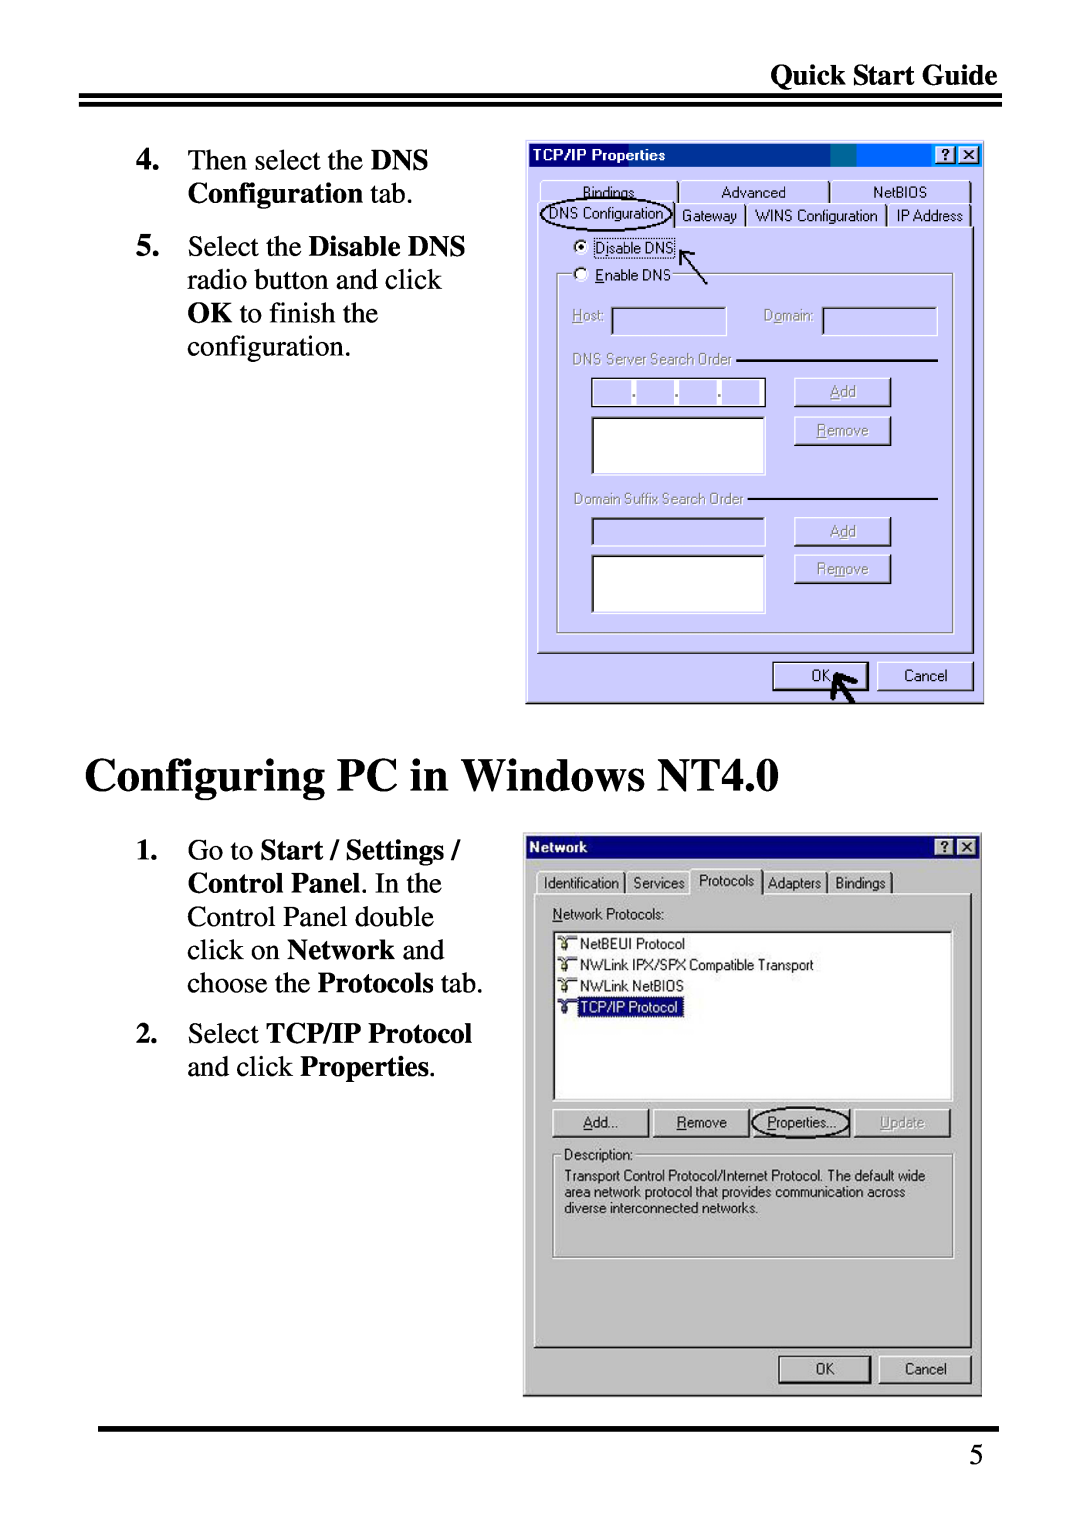 Billion Electric Company BIPAC-645 quick start Configuring PC in Windows NT4.0, Select TCP/IP Protocol and click Properties 